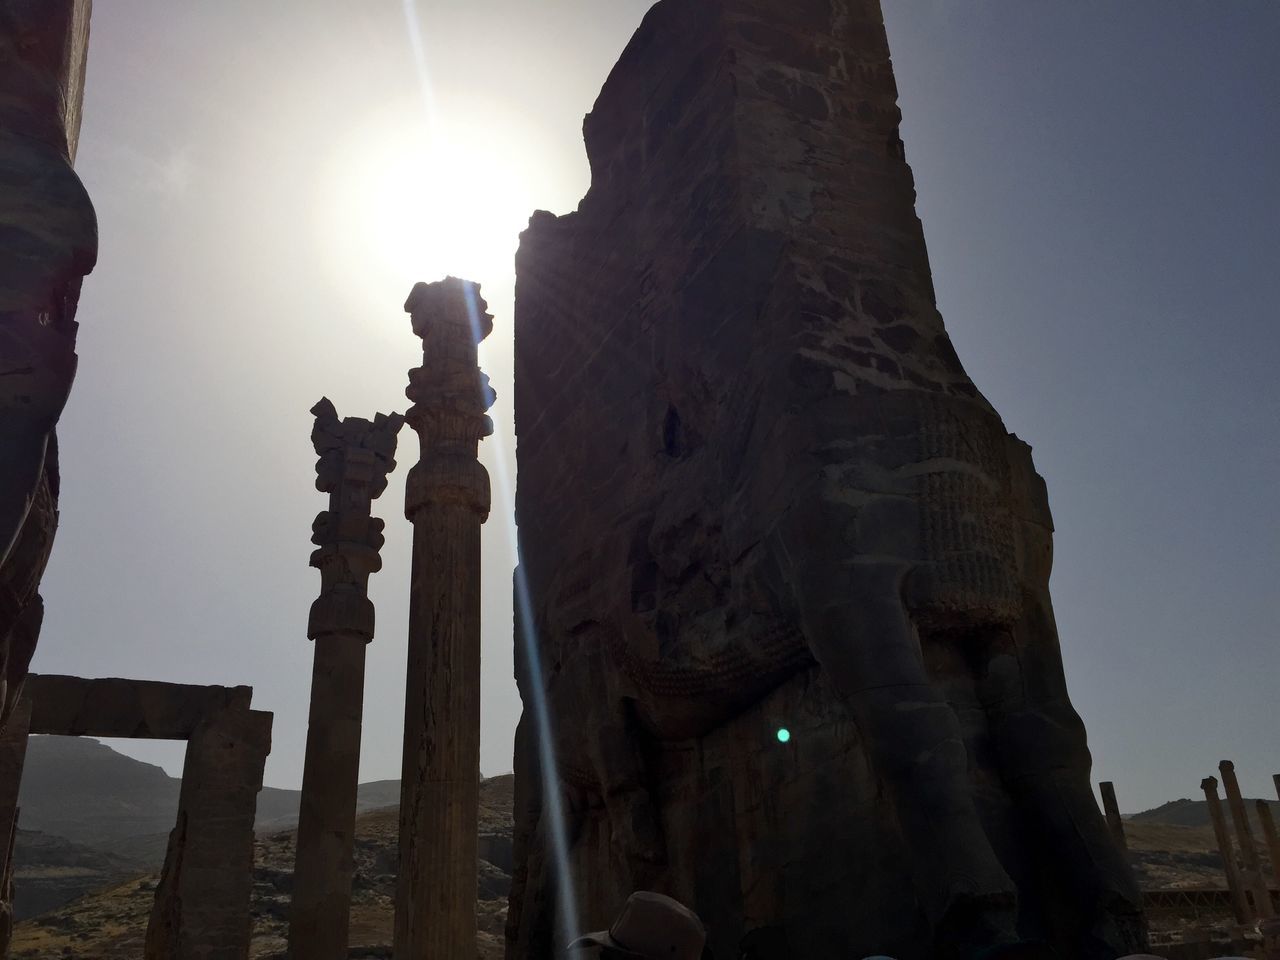 sun, sunbeam, low angle view, built structure, architecture, sunlight, lens flare, clear sky, sky, history, old ruin, building exterior, ancient, silhouette, sunny, famous place, travel destinations, architectural column, tourism, outdoors